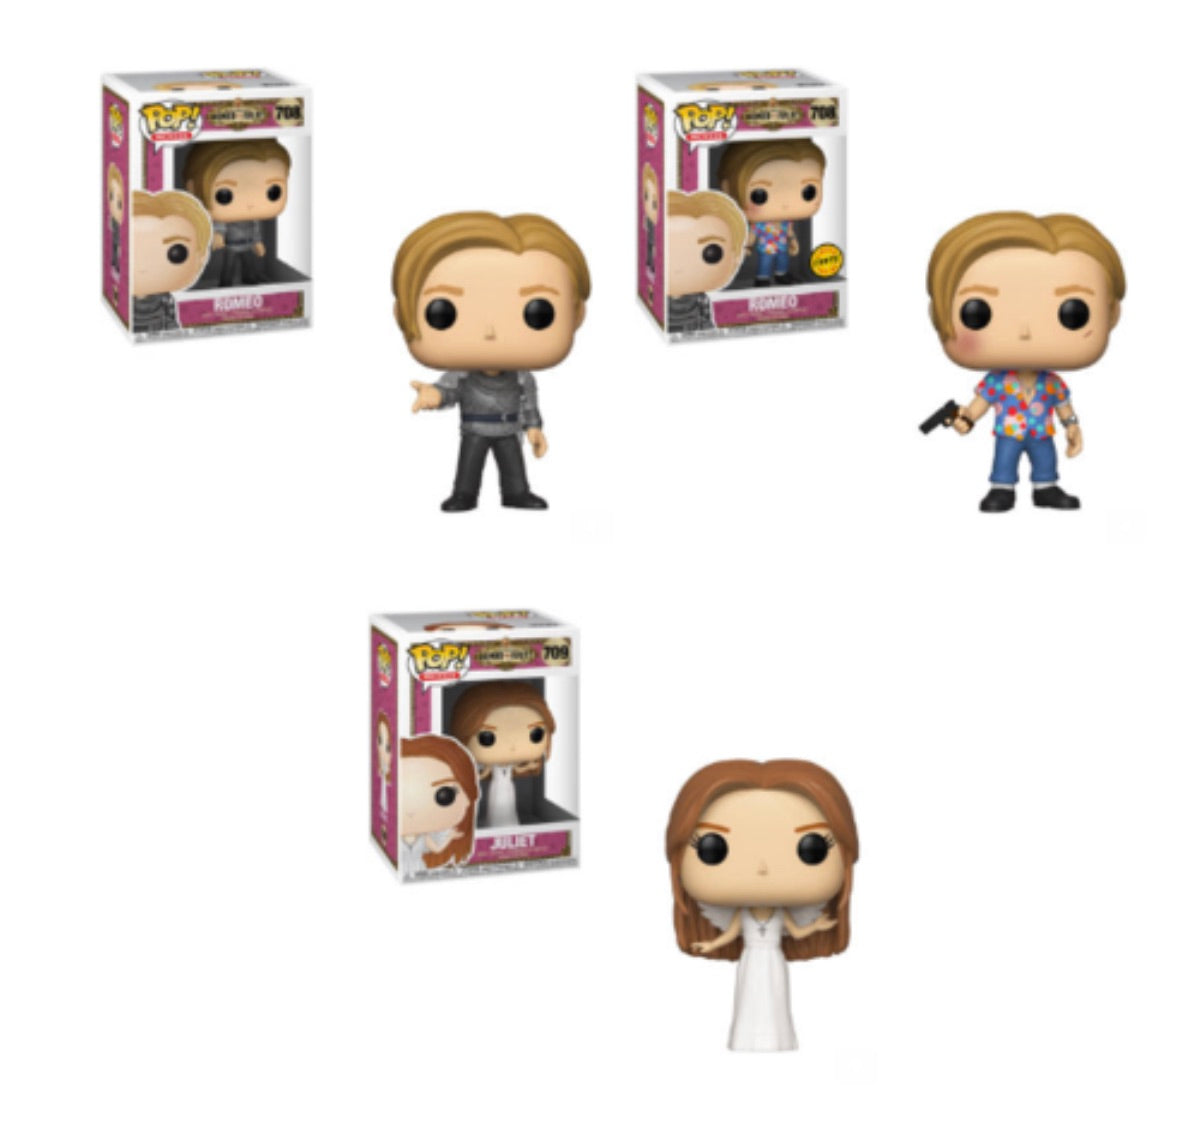 ROMEO + JULIET FUNKO POP! COMPLETE SET 3 CHASE INCLUDED (PRE-ORDER)